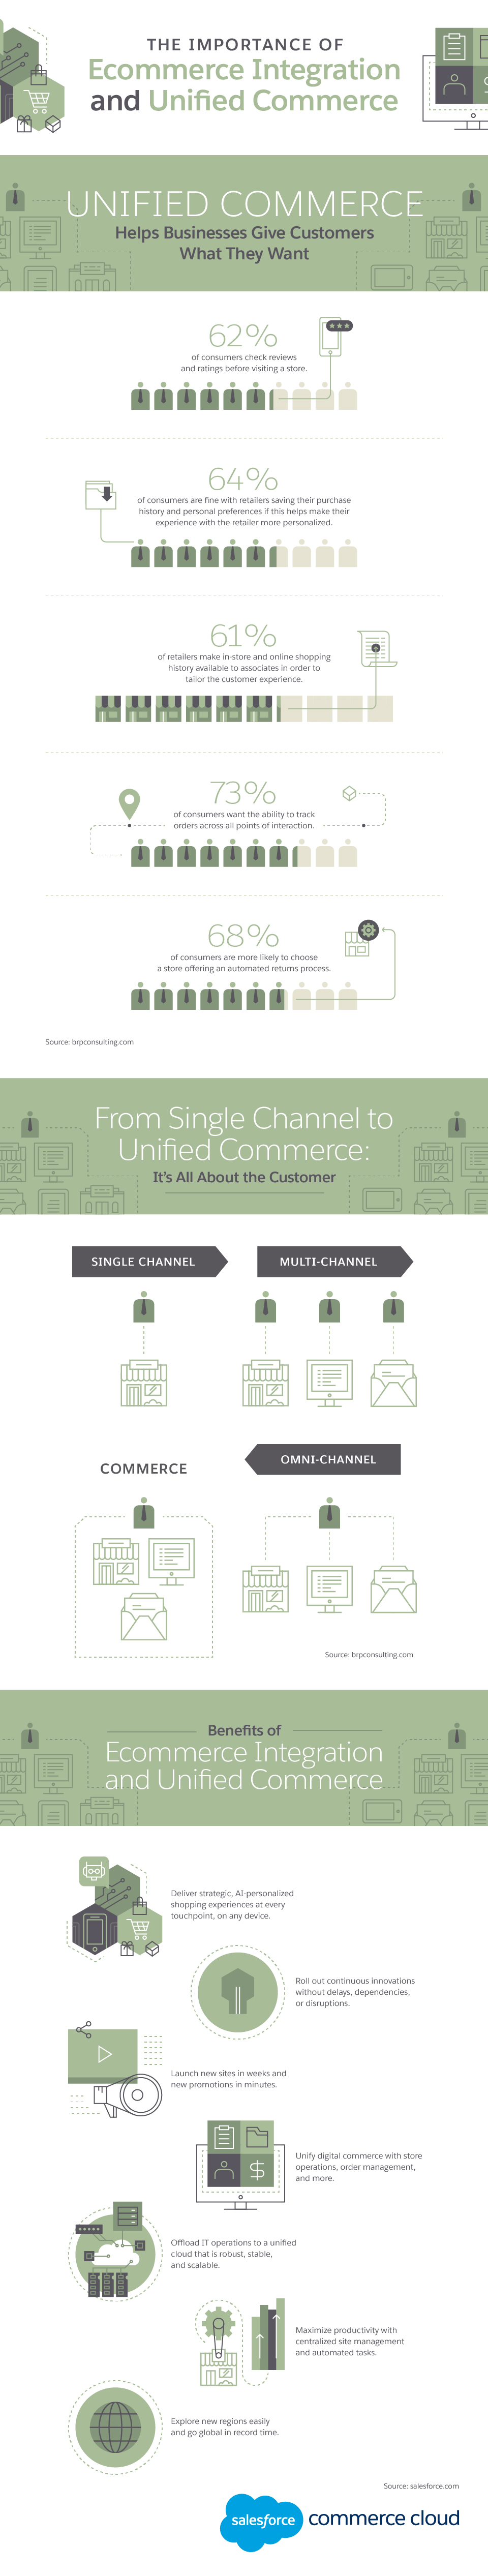 The Importance of Ecommerce Integration and Unified Commerce